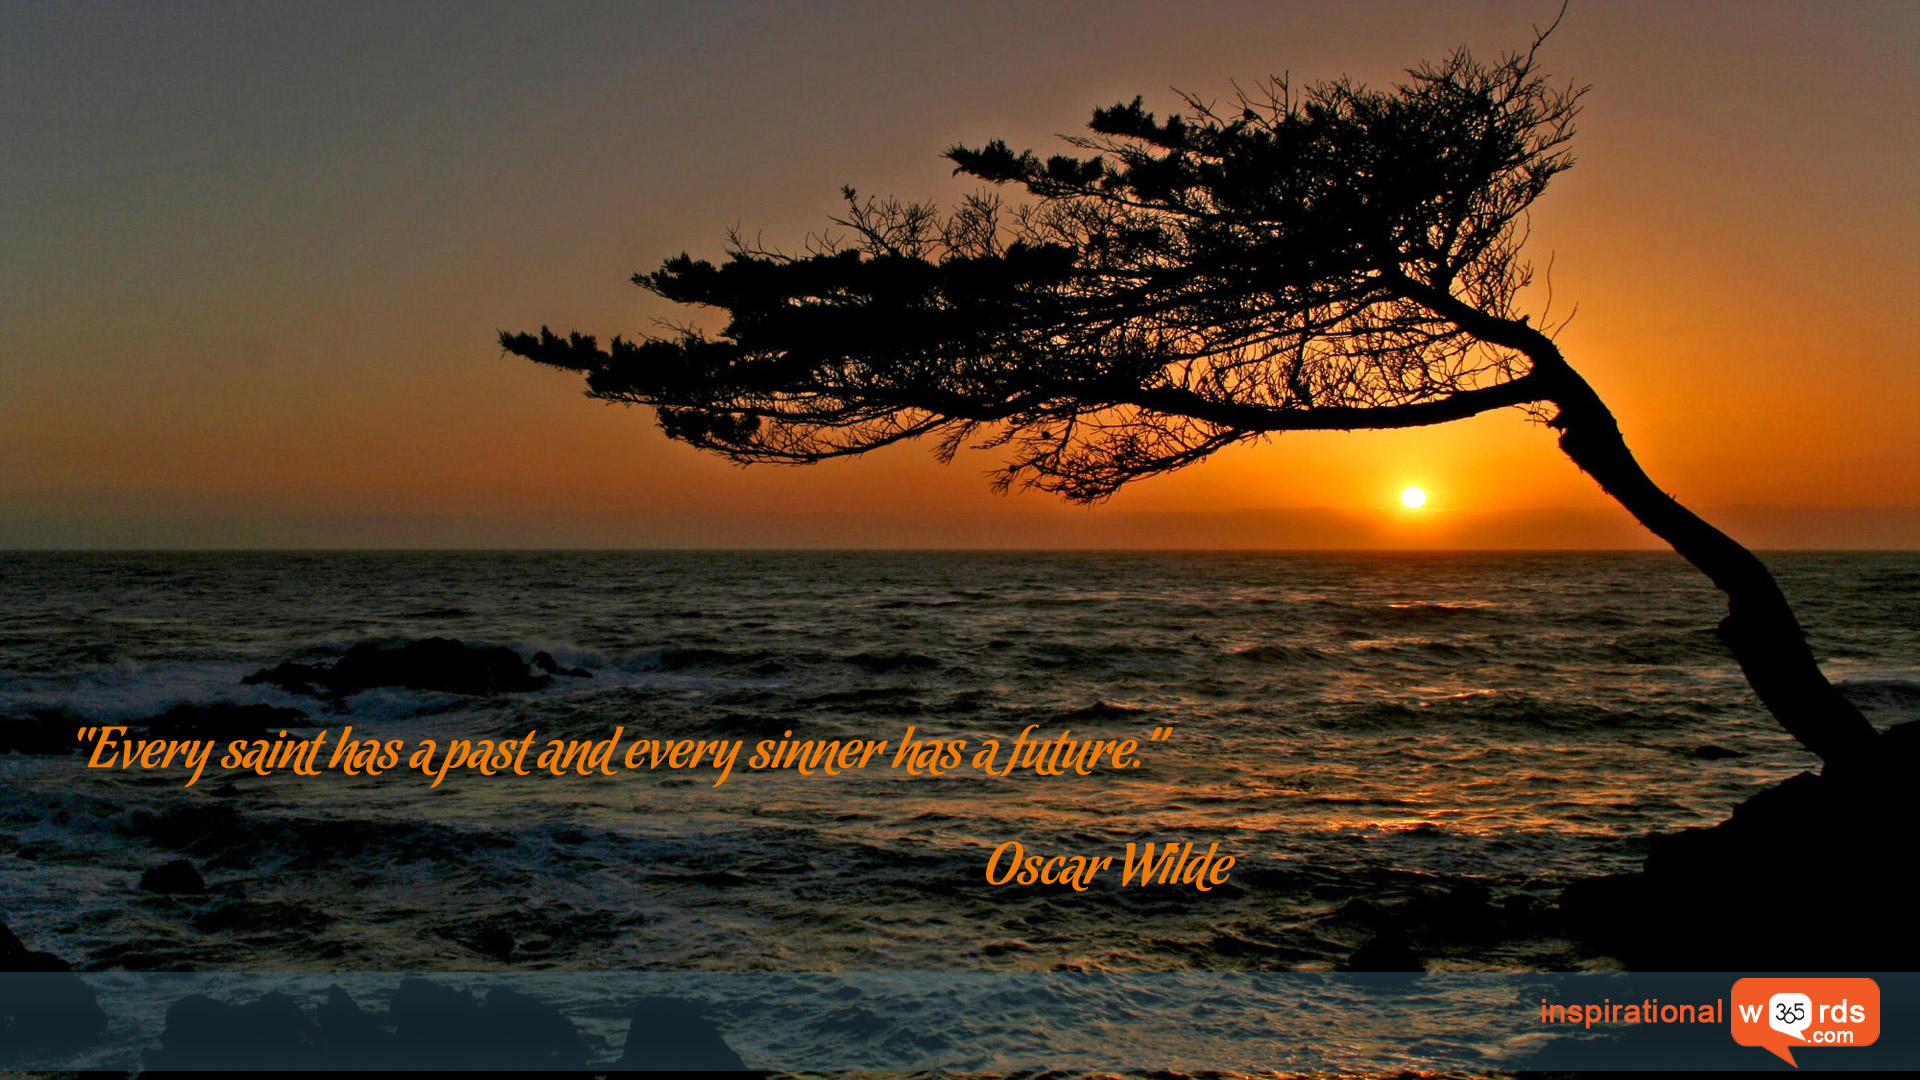 Inspirational Wallpaper Quote by Oscar Wilde